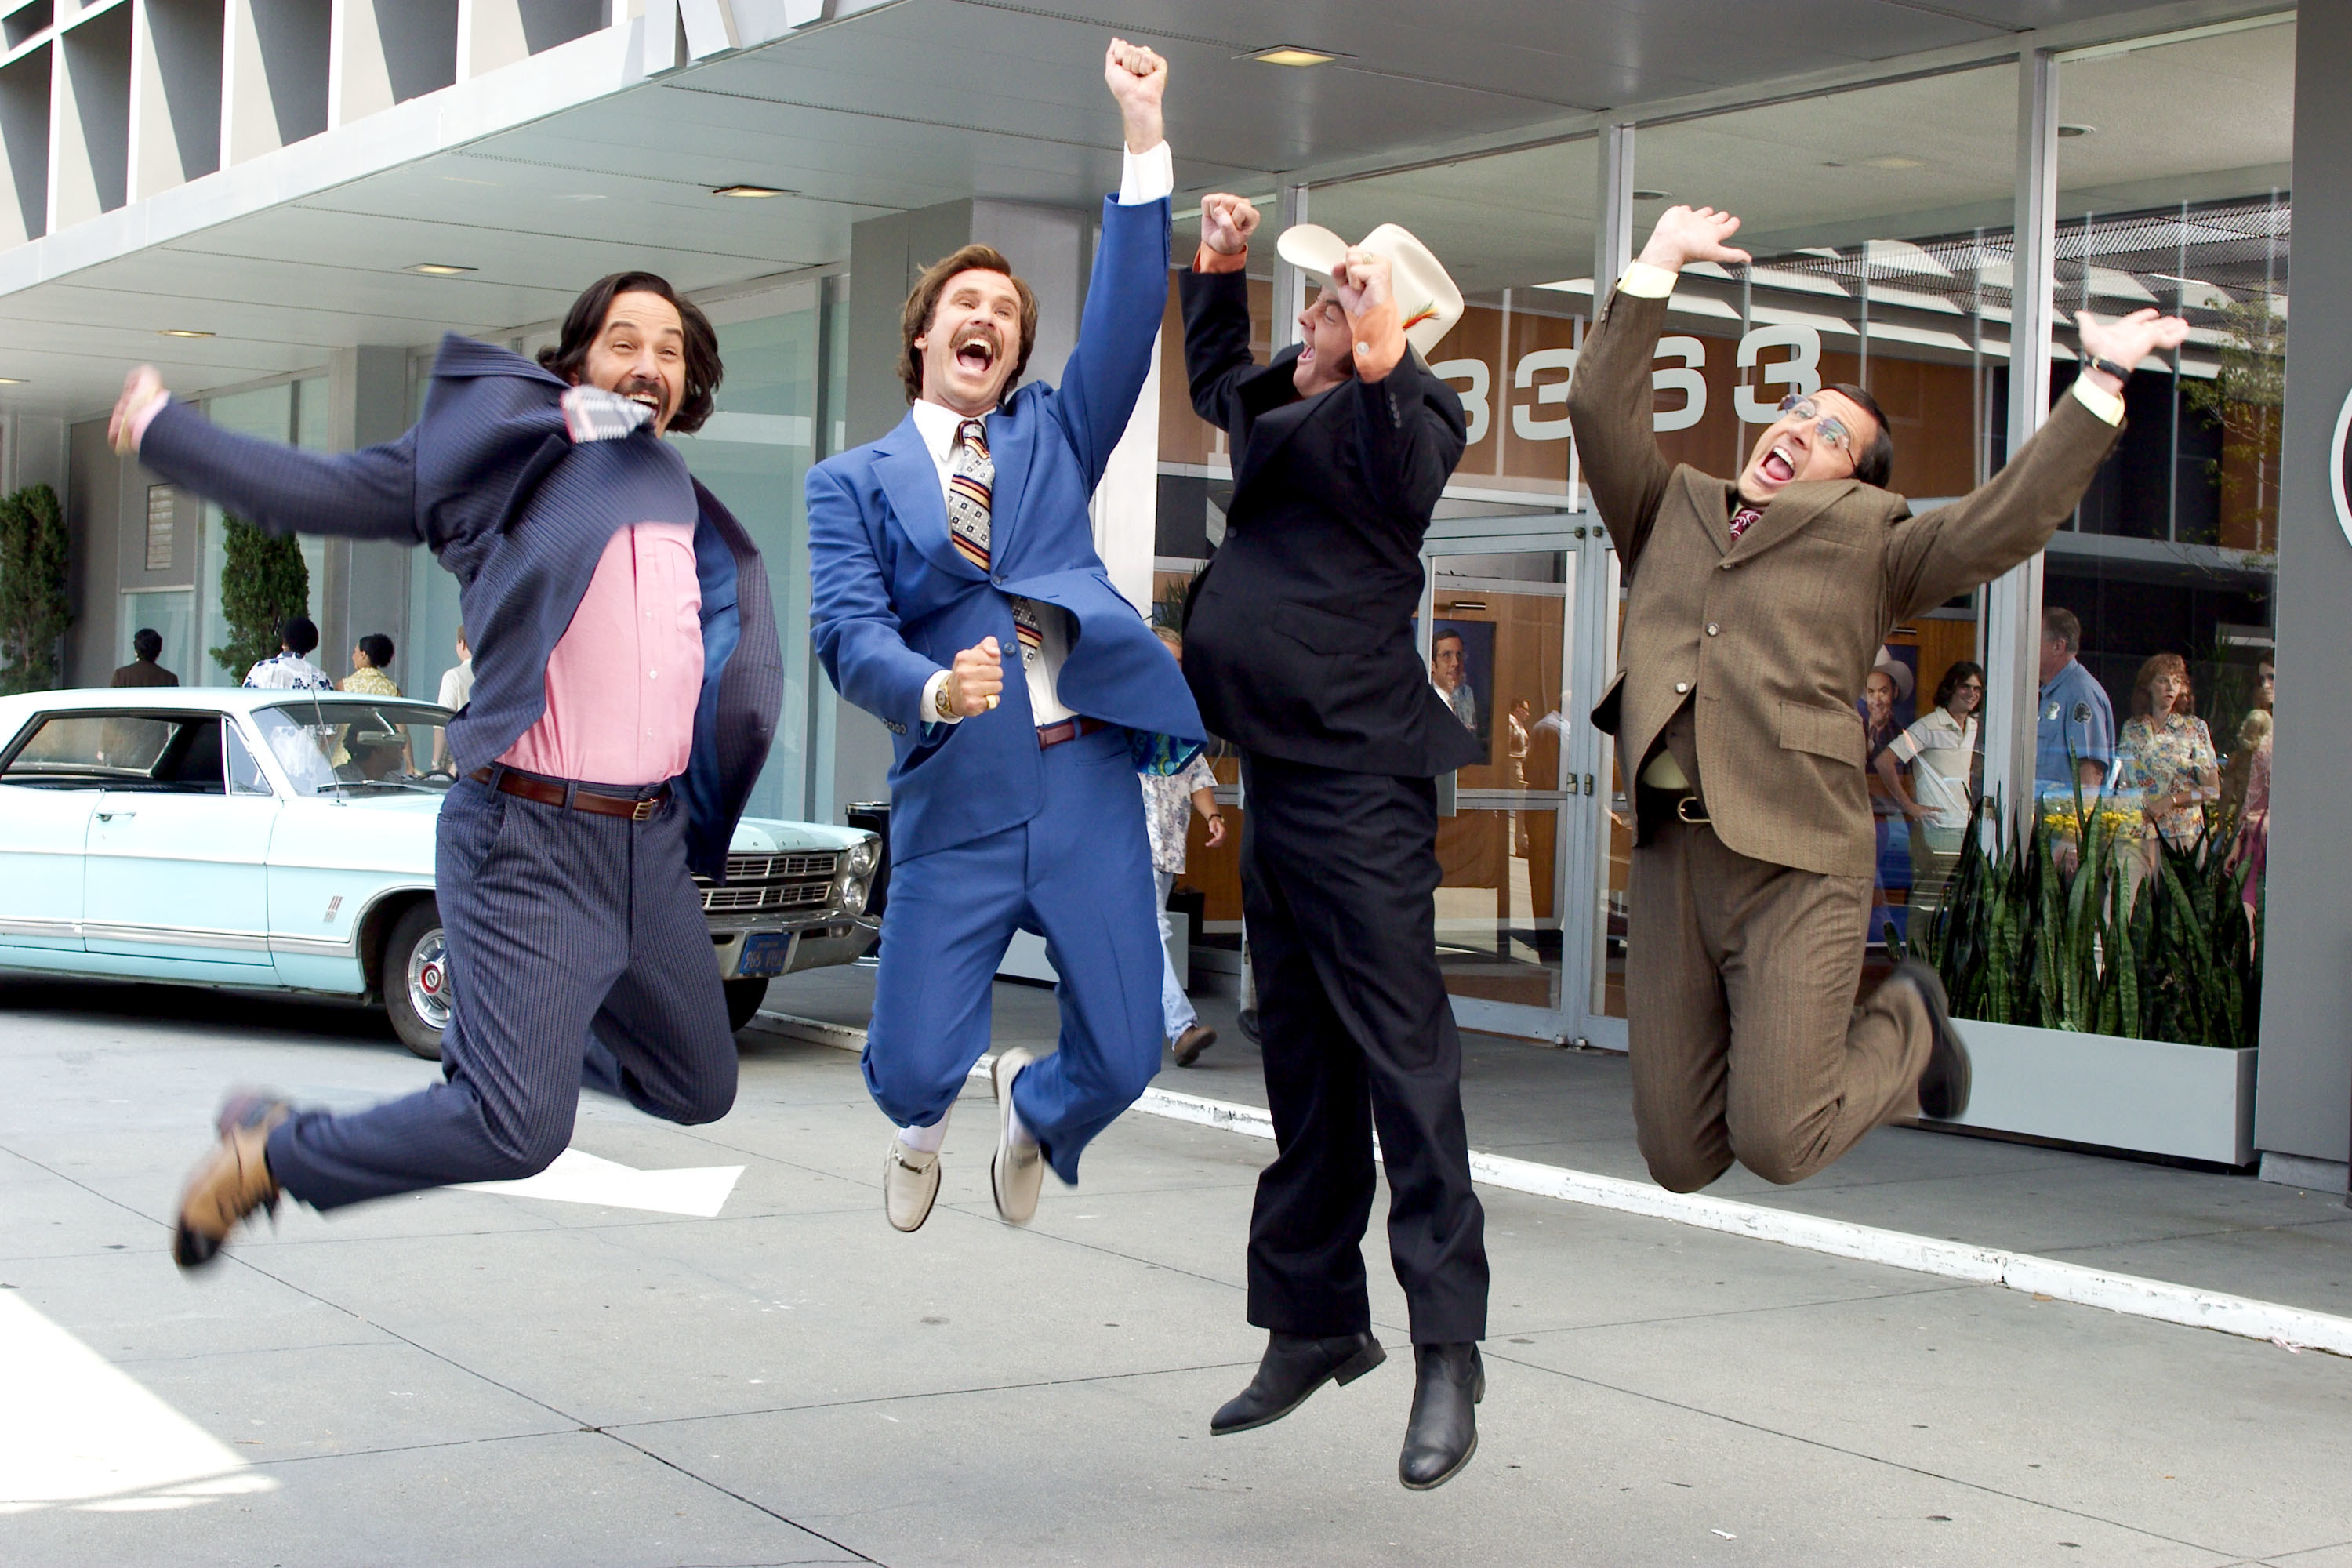 Paul Rudd, Will Ferrell, David Koechner, and Steve Carell jumping in the air